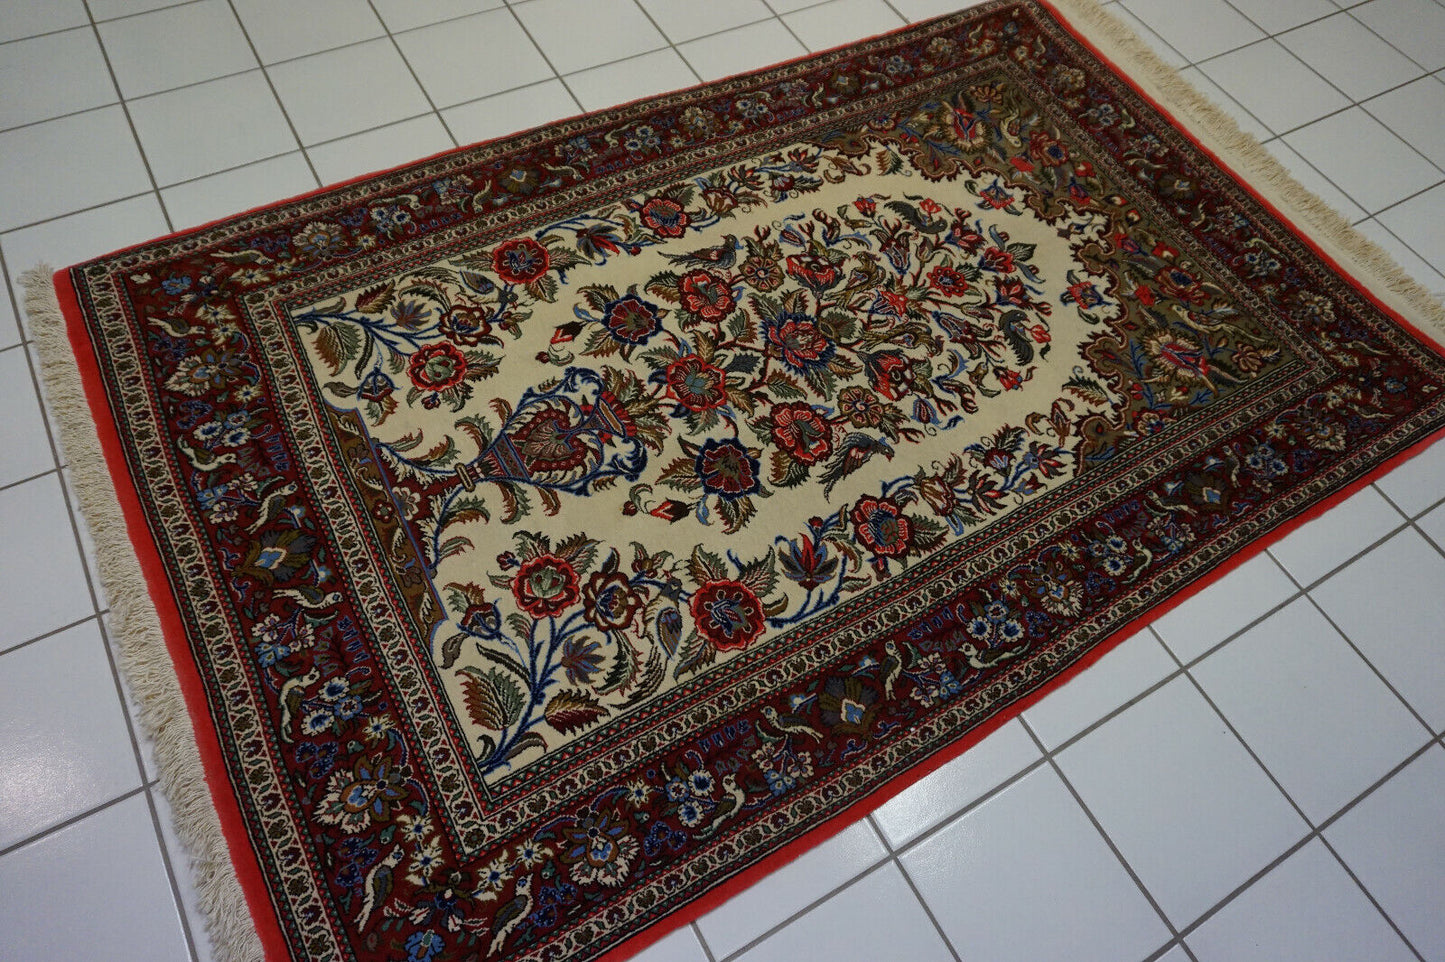 Detailed view of red floral patterns on the Persian Style Rug